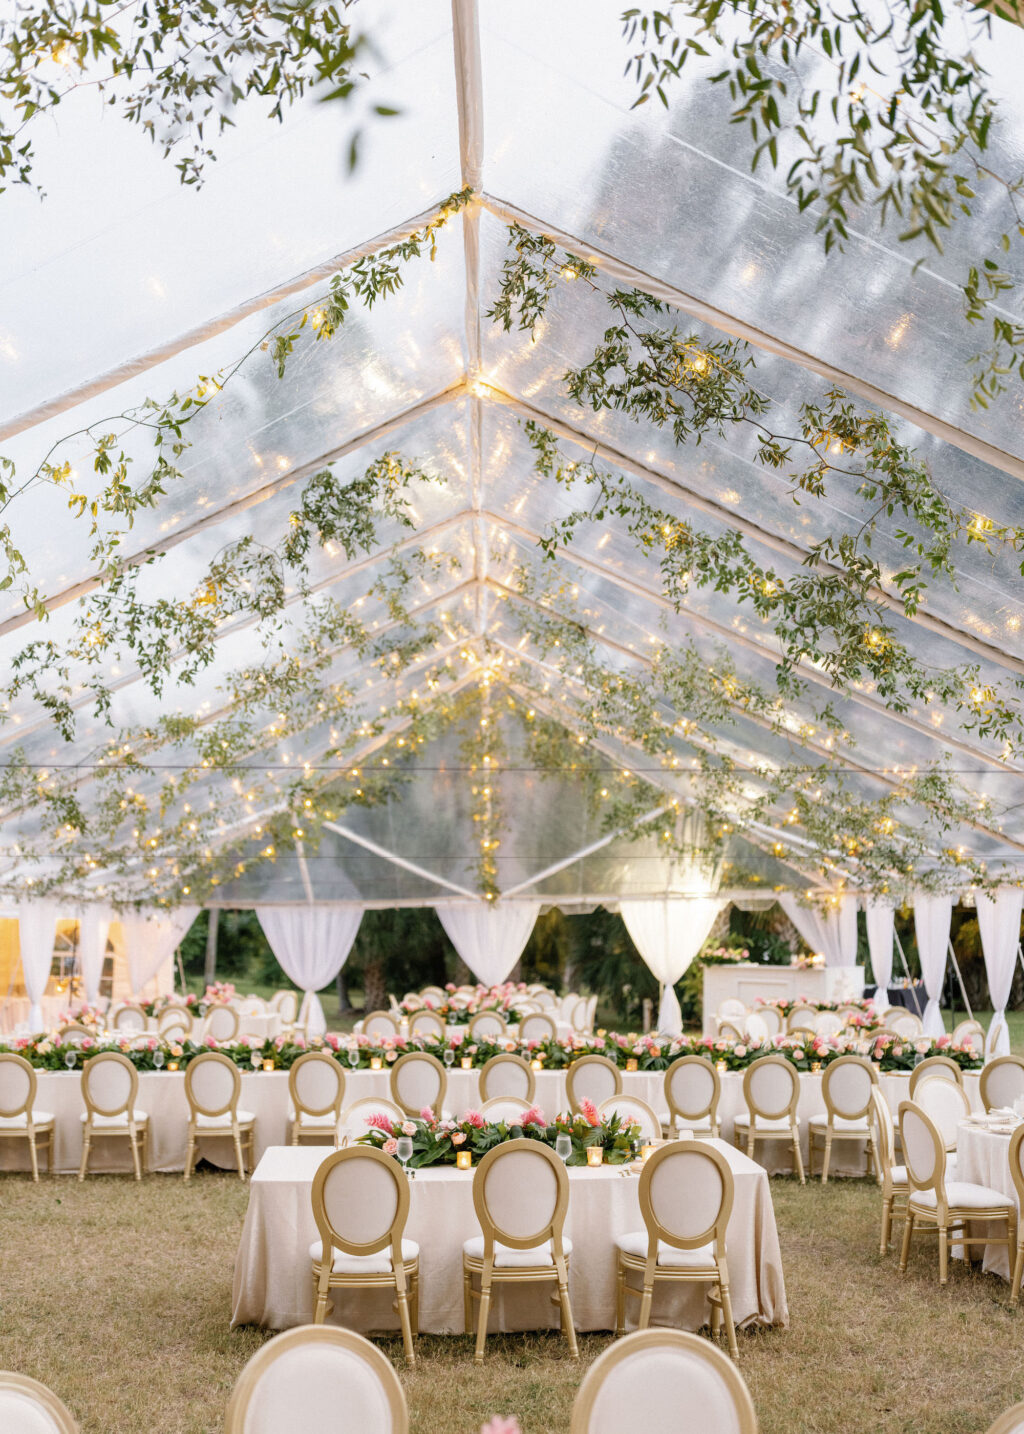 Luxurious Classic Outdoor Tent Wedding Reception Decor, Gold and Ivory Dining Chairs, Low Pink and Peach with Greenery Floral Bouquets, Hanging Greenery Garland, White Linens | Tampa Bay Wedding Venue Powel Crosley Estate | Tampa Bay Wedding Florist Botanica International Design Studio